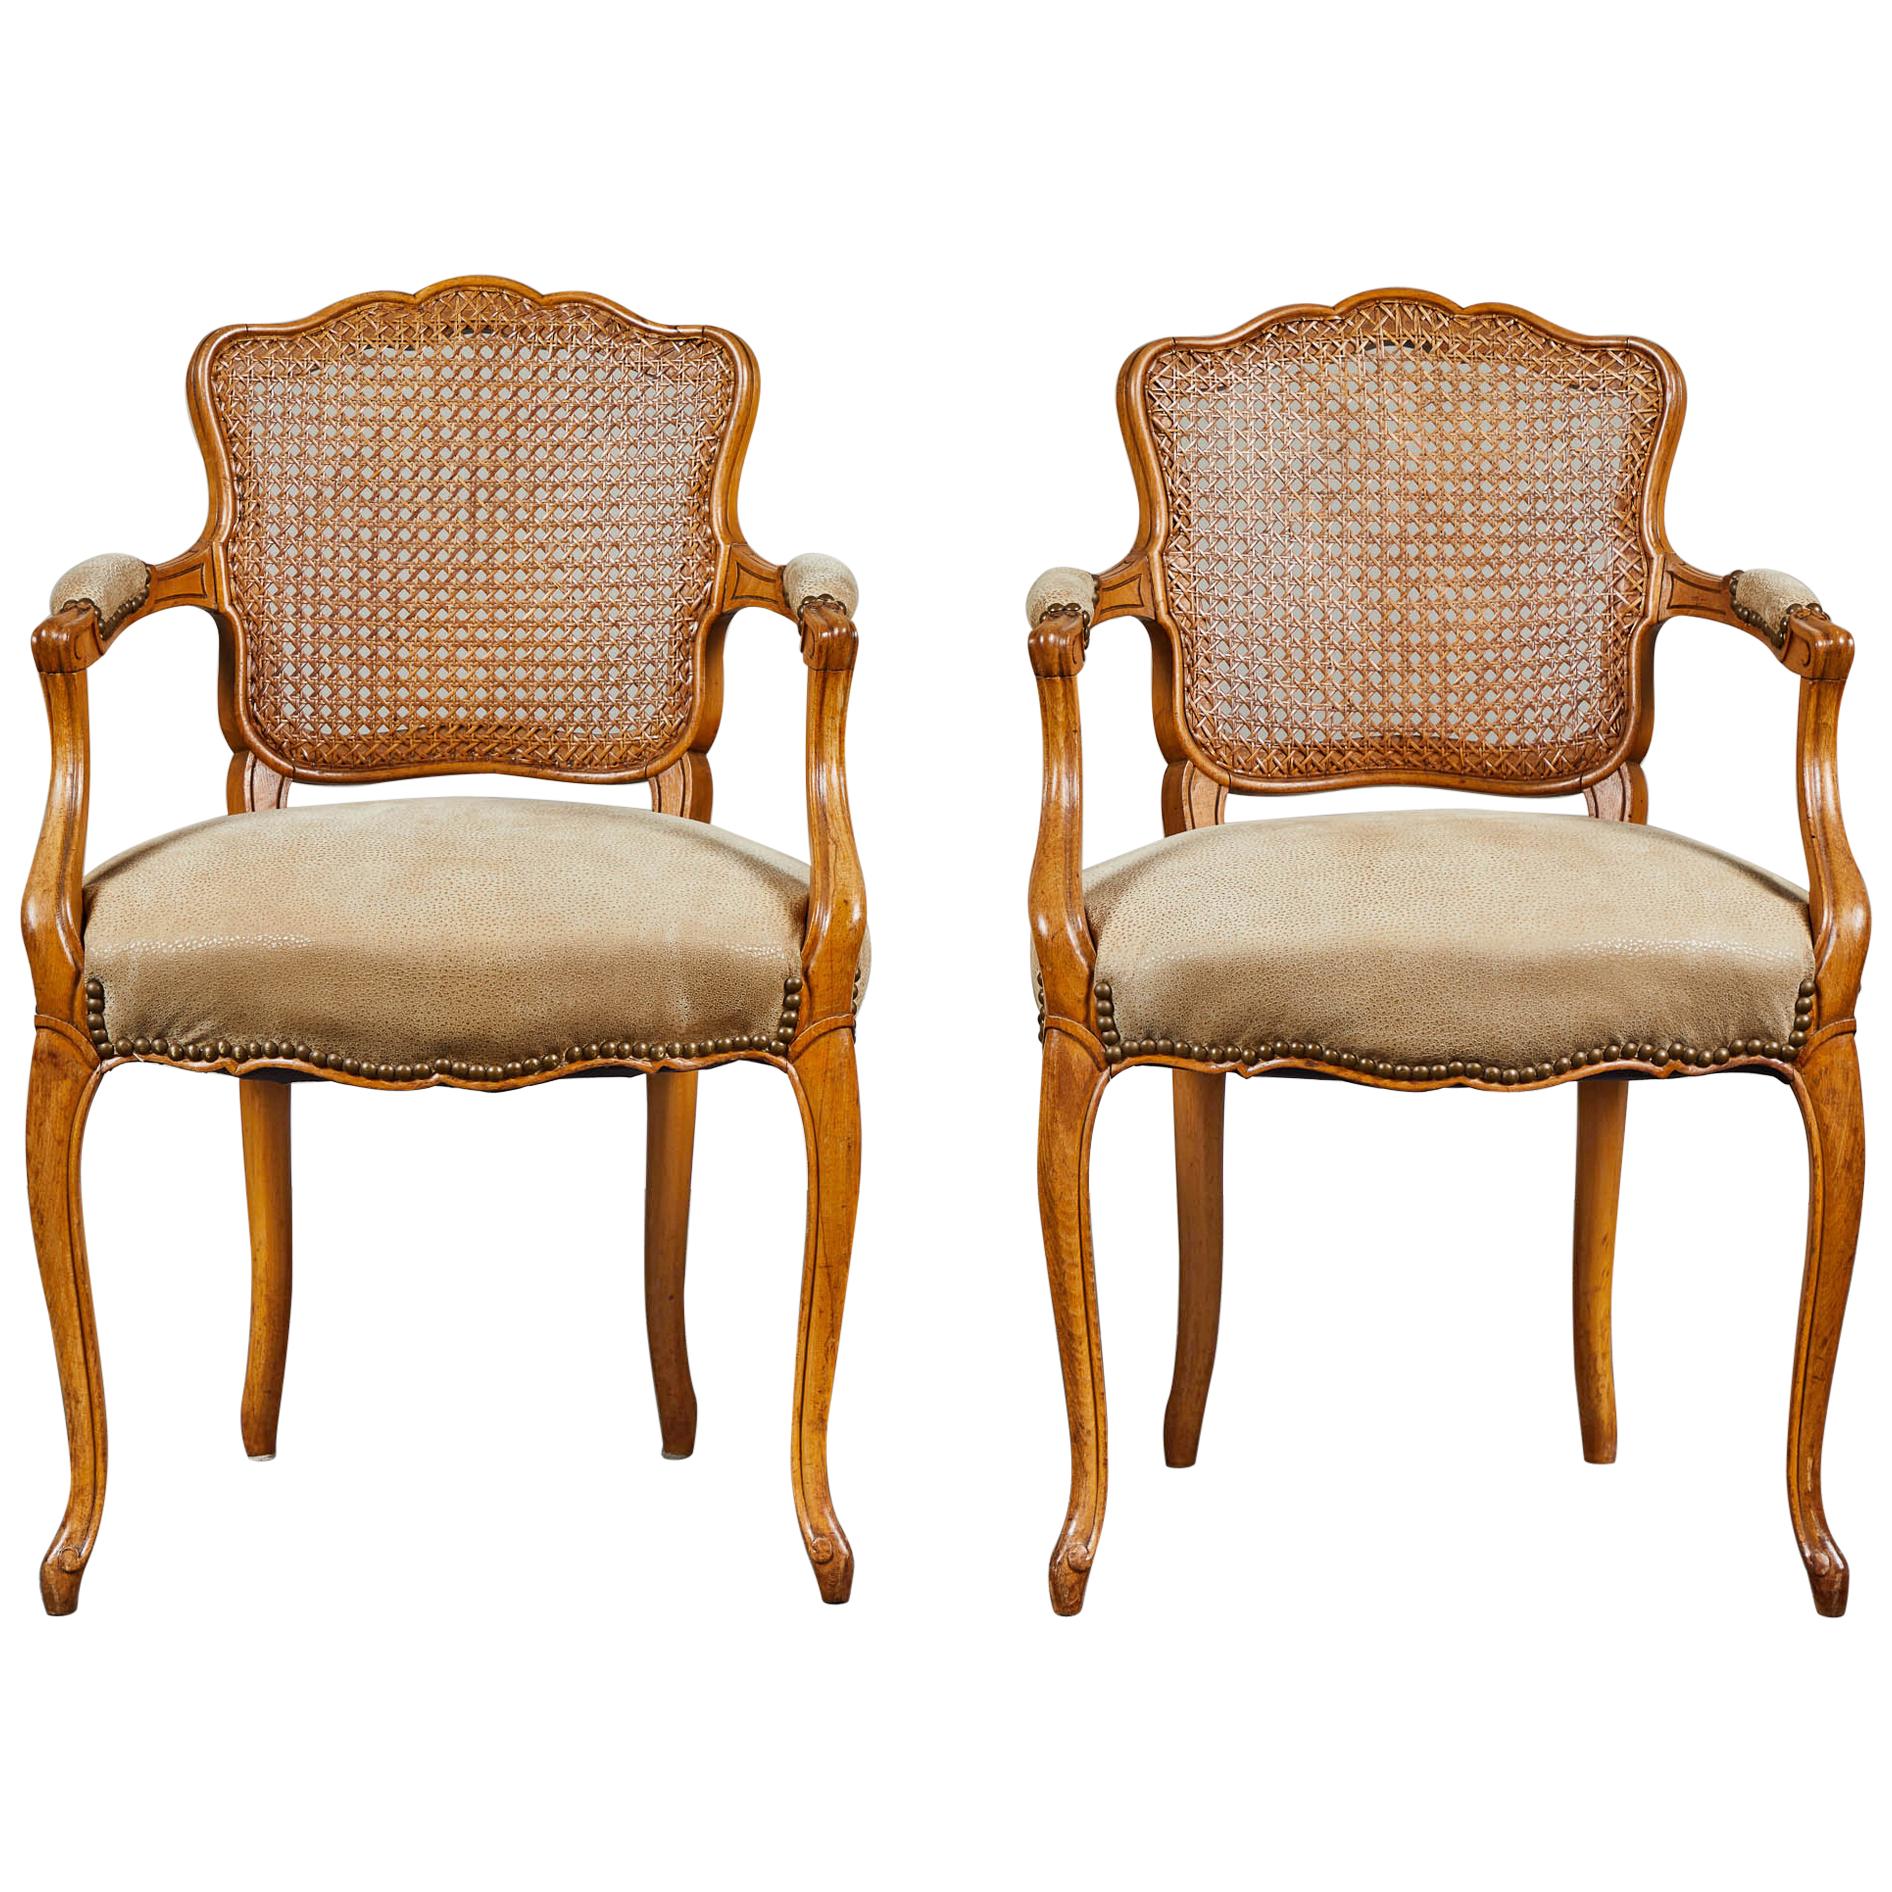 Set of Four 19th Century Louis XV Style Caned Armchairs